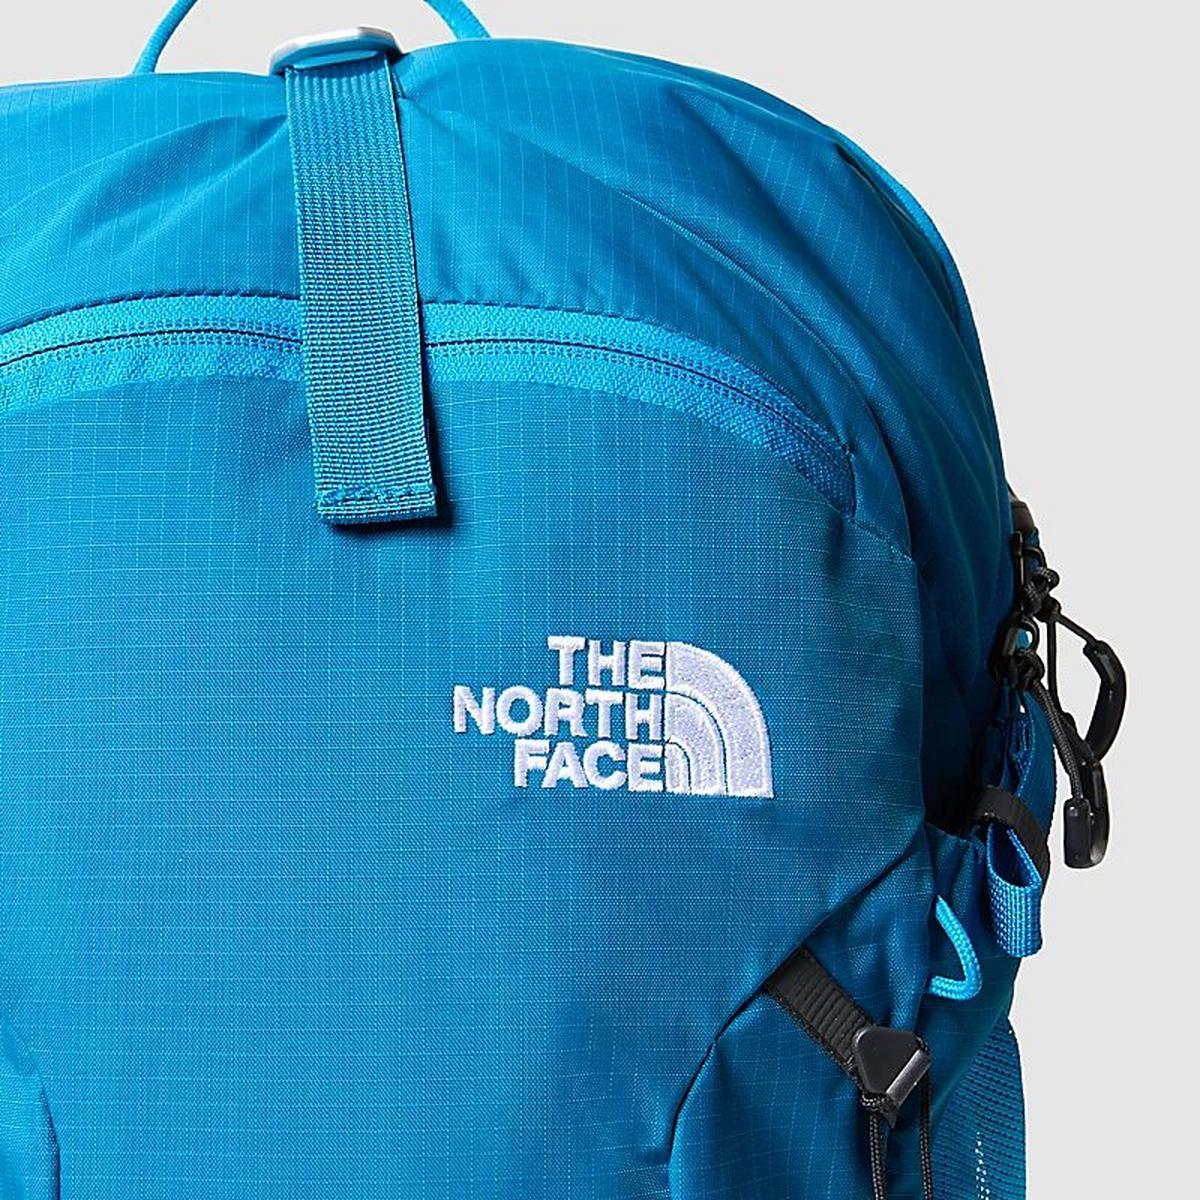 The North Face Trail Lite Speed 20L Backpack - Blue